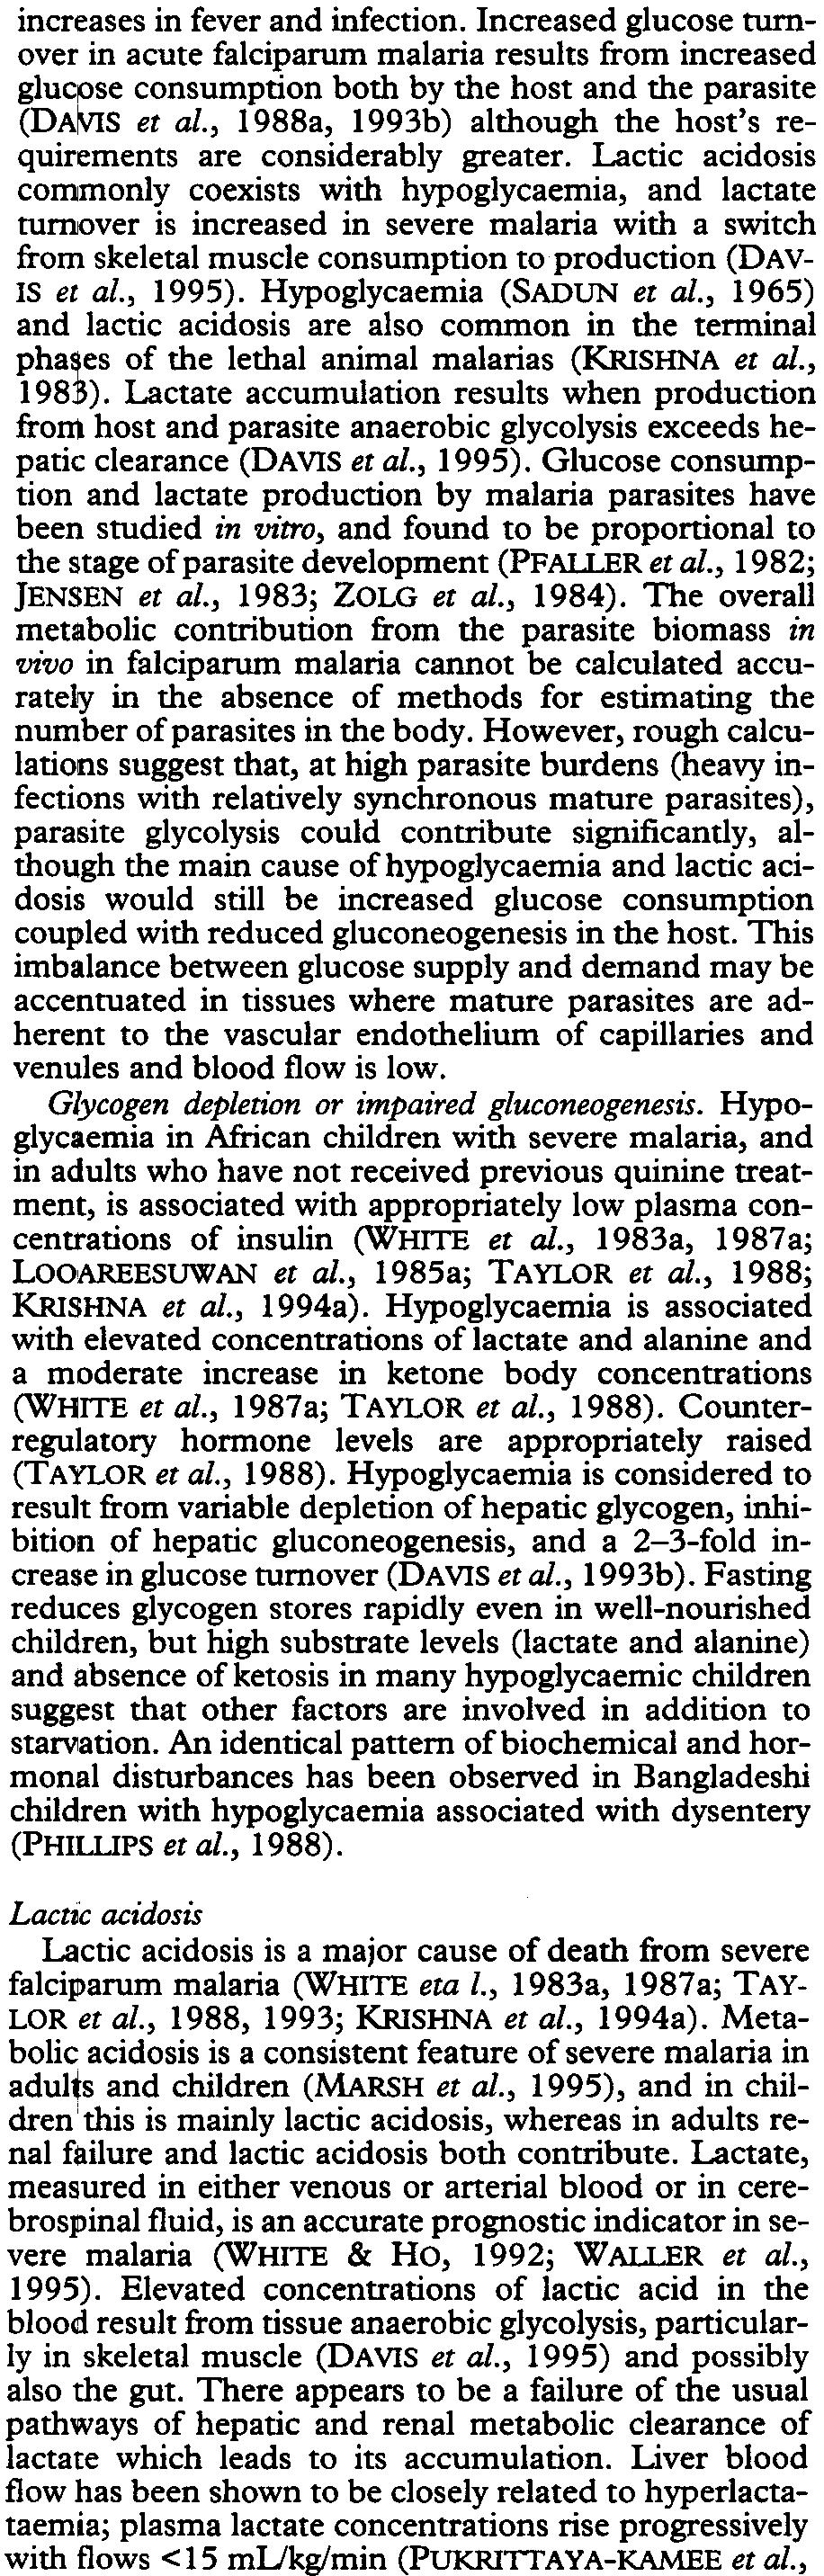 Glucose consumption and lactate production by malaria parasites have been studied in vitro, and found to be proportional to the stage of parasite development (PFAlLER et at., 1982; JENSEN et at.